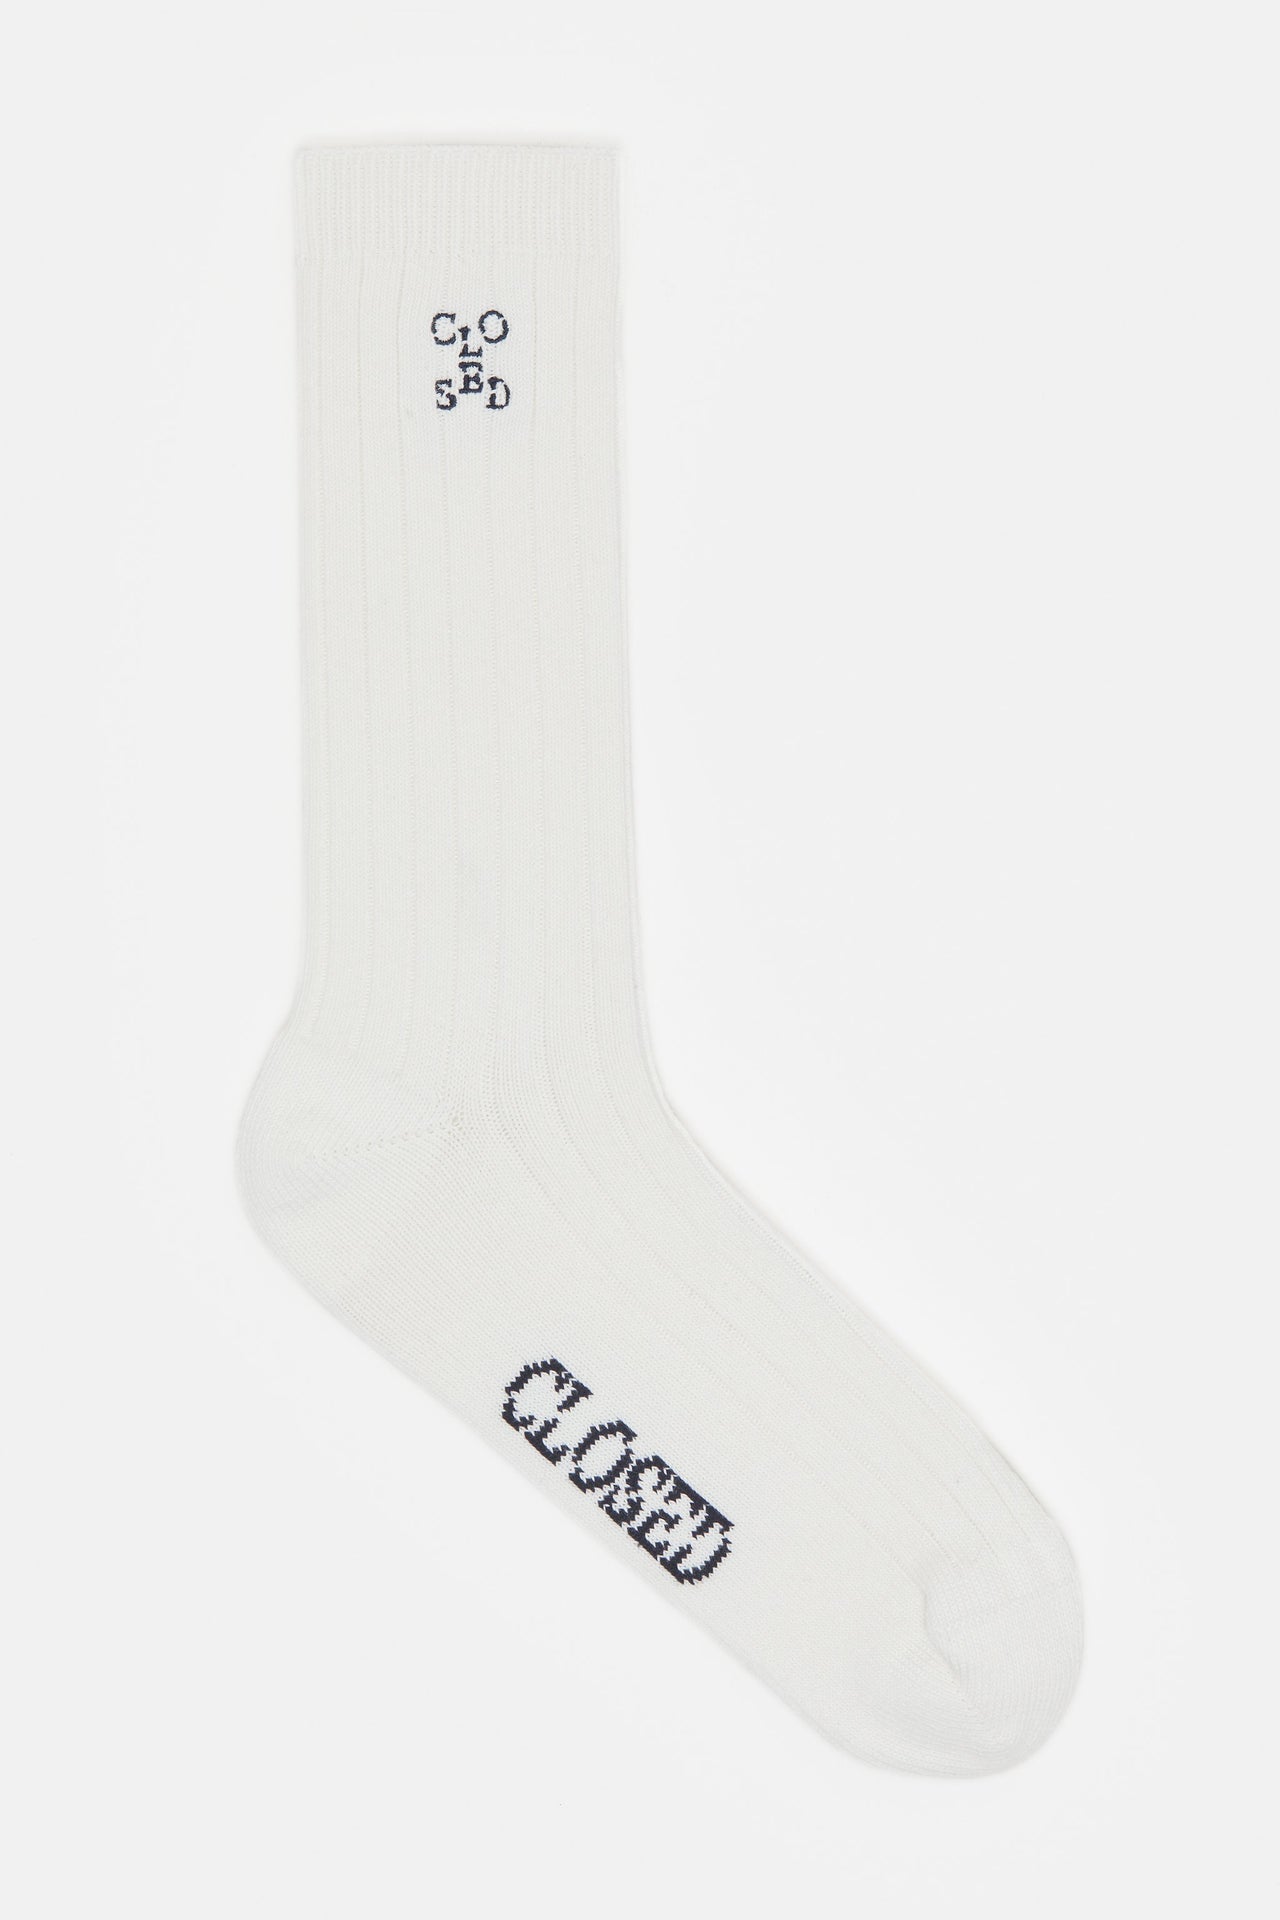 CLOSED MENS LOGO SOCKS - 2 COLORS AVAILABLE